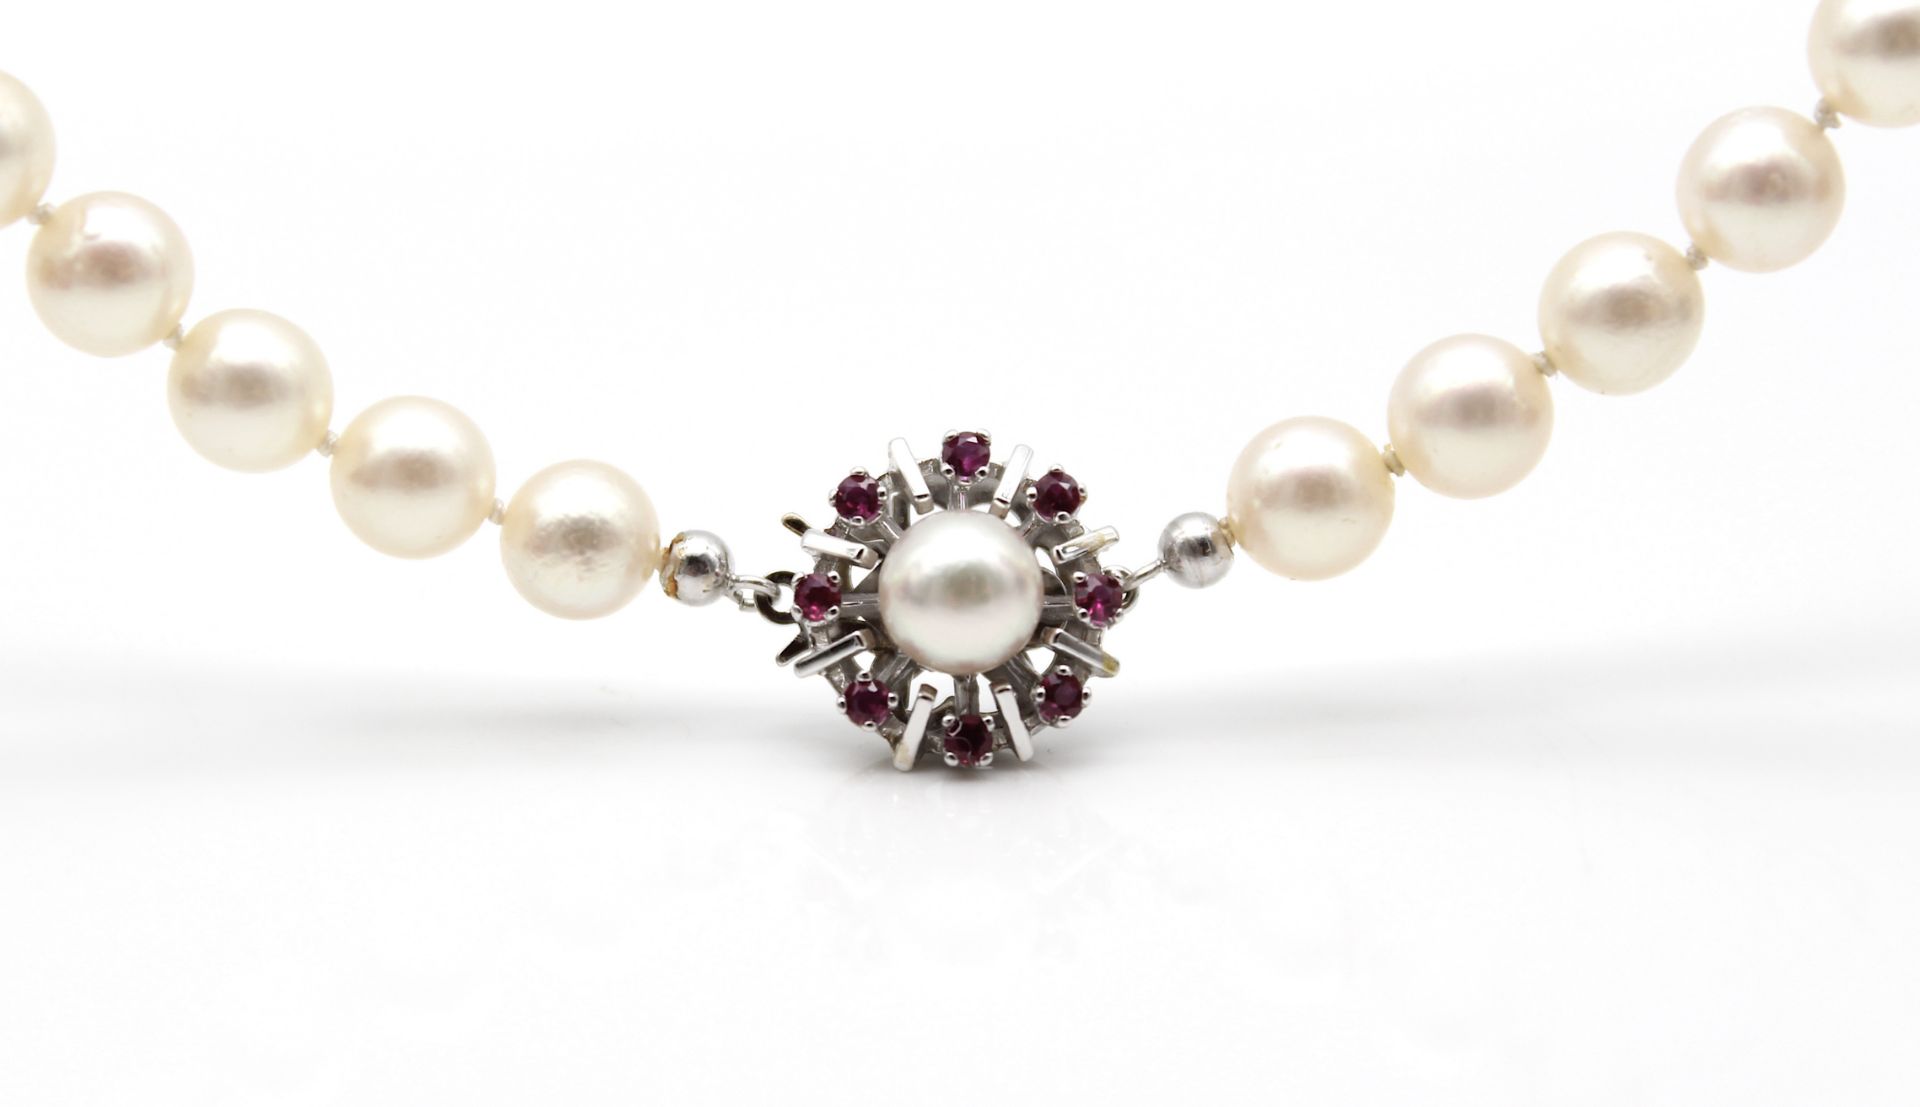 Cultured pearl necklace with rubies